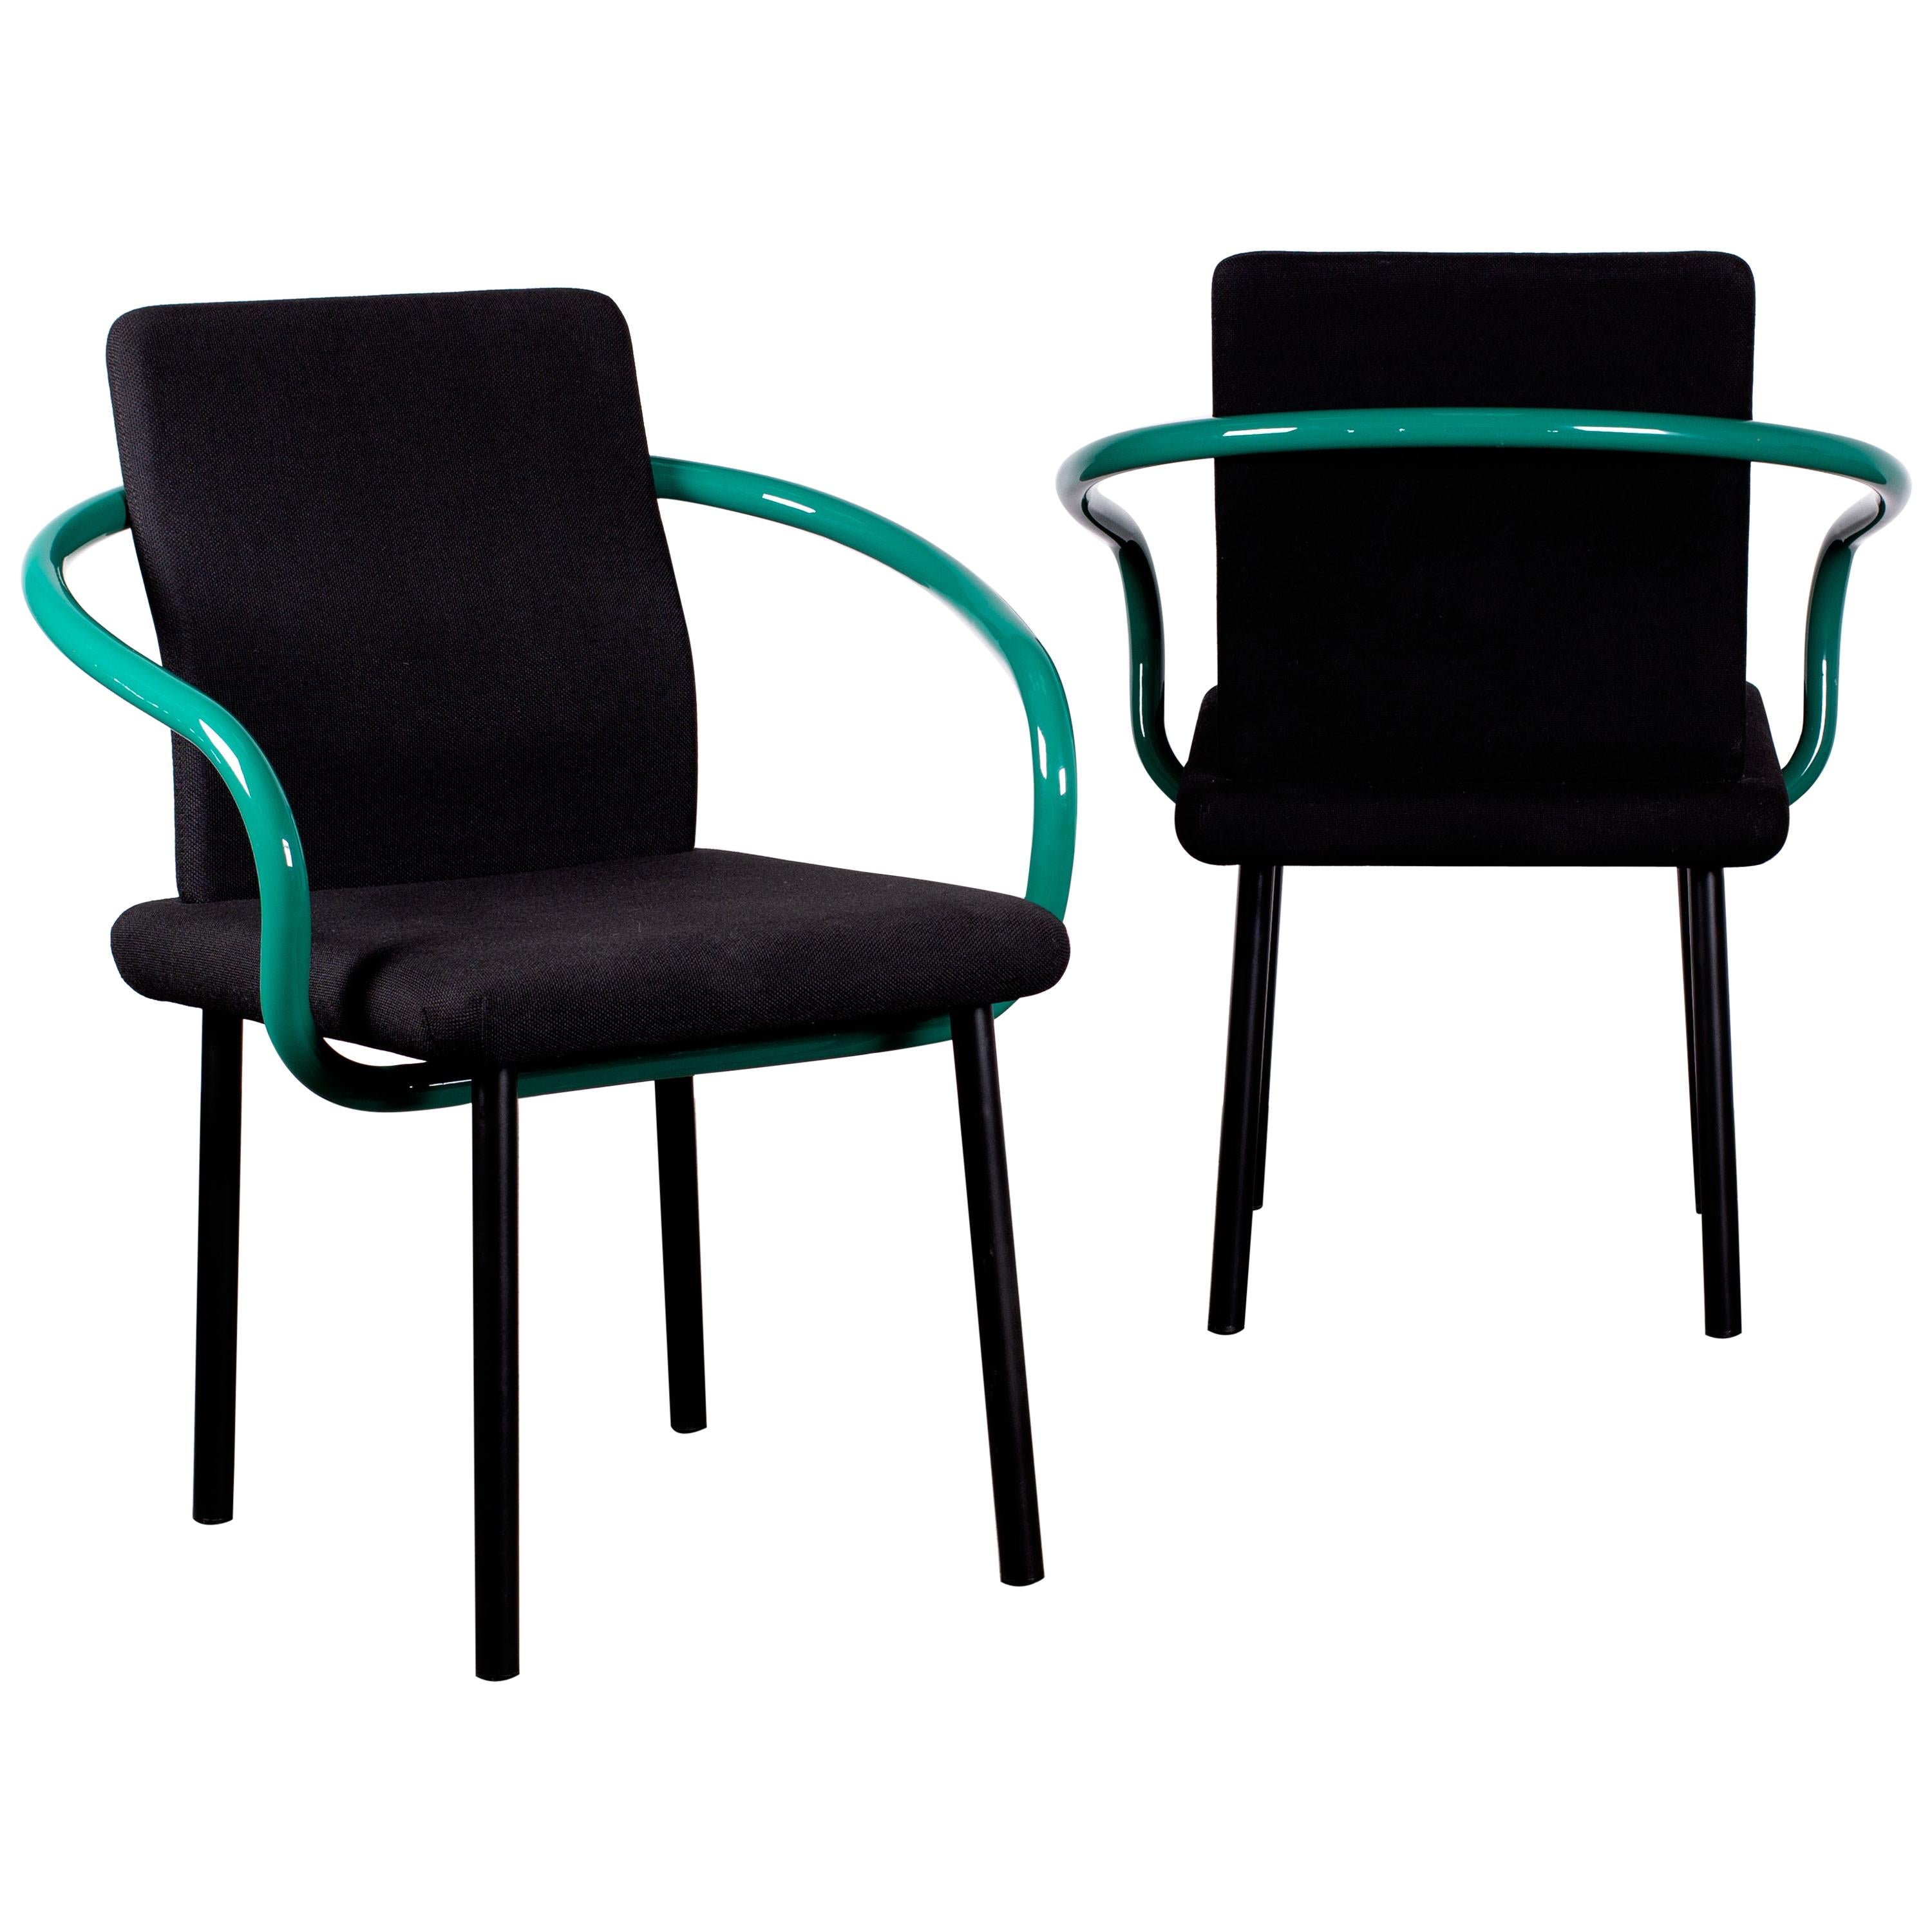 Pair of Ettore Sottsass Mandarin Chairs for Knoll in Green & Black